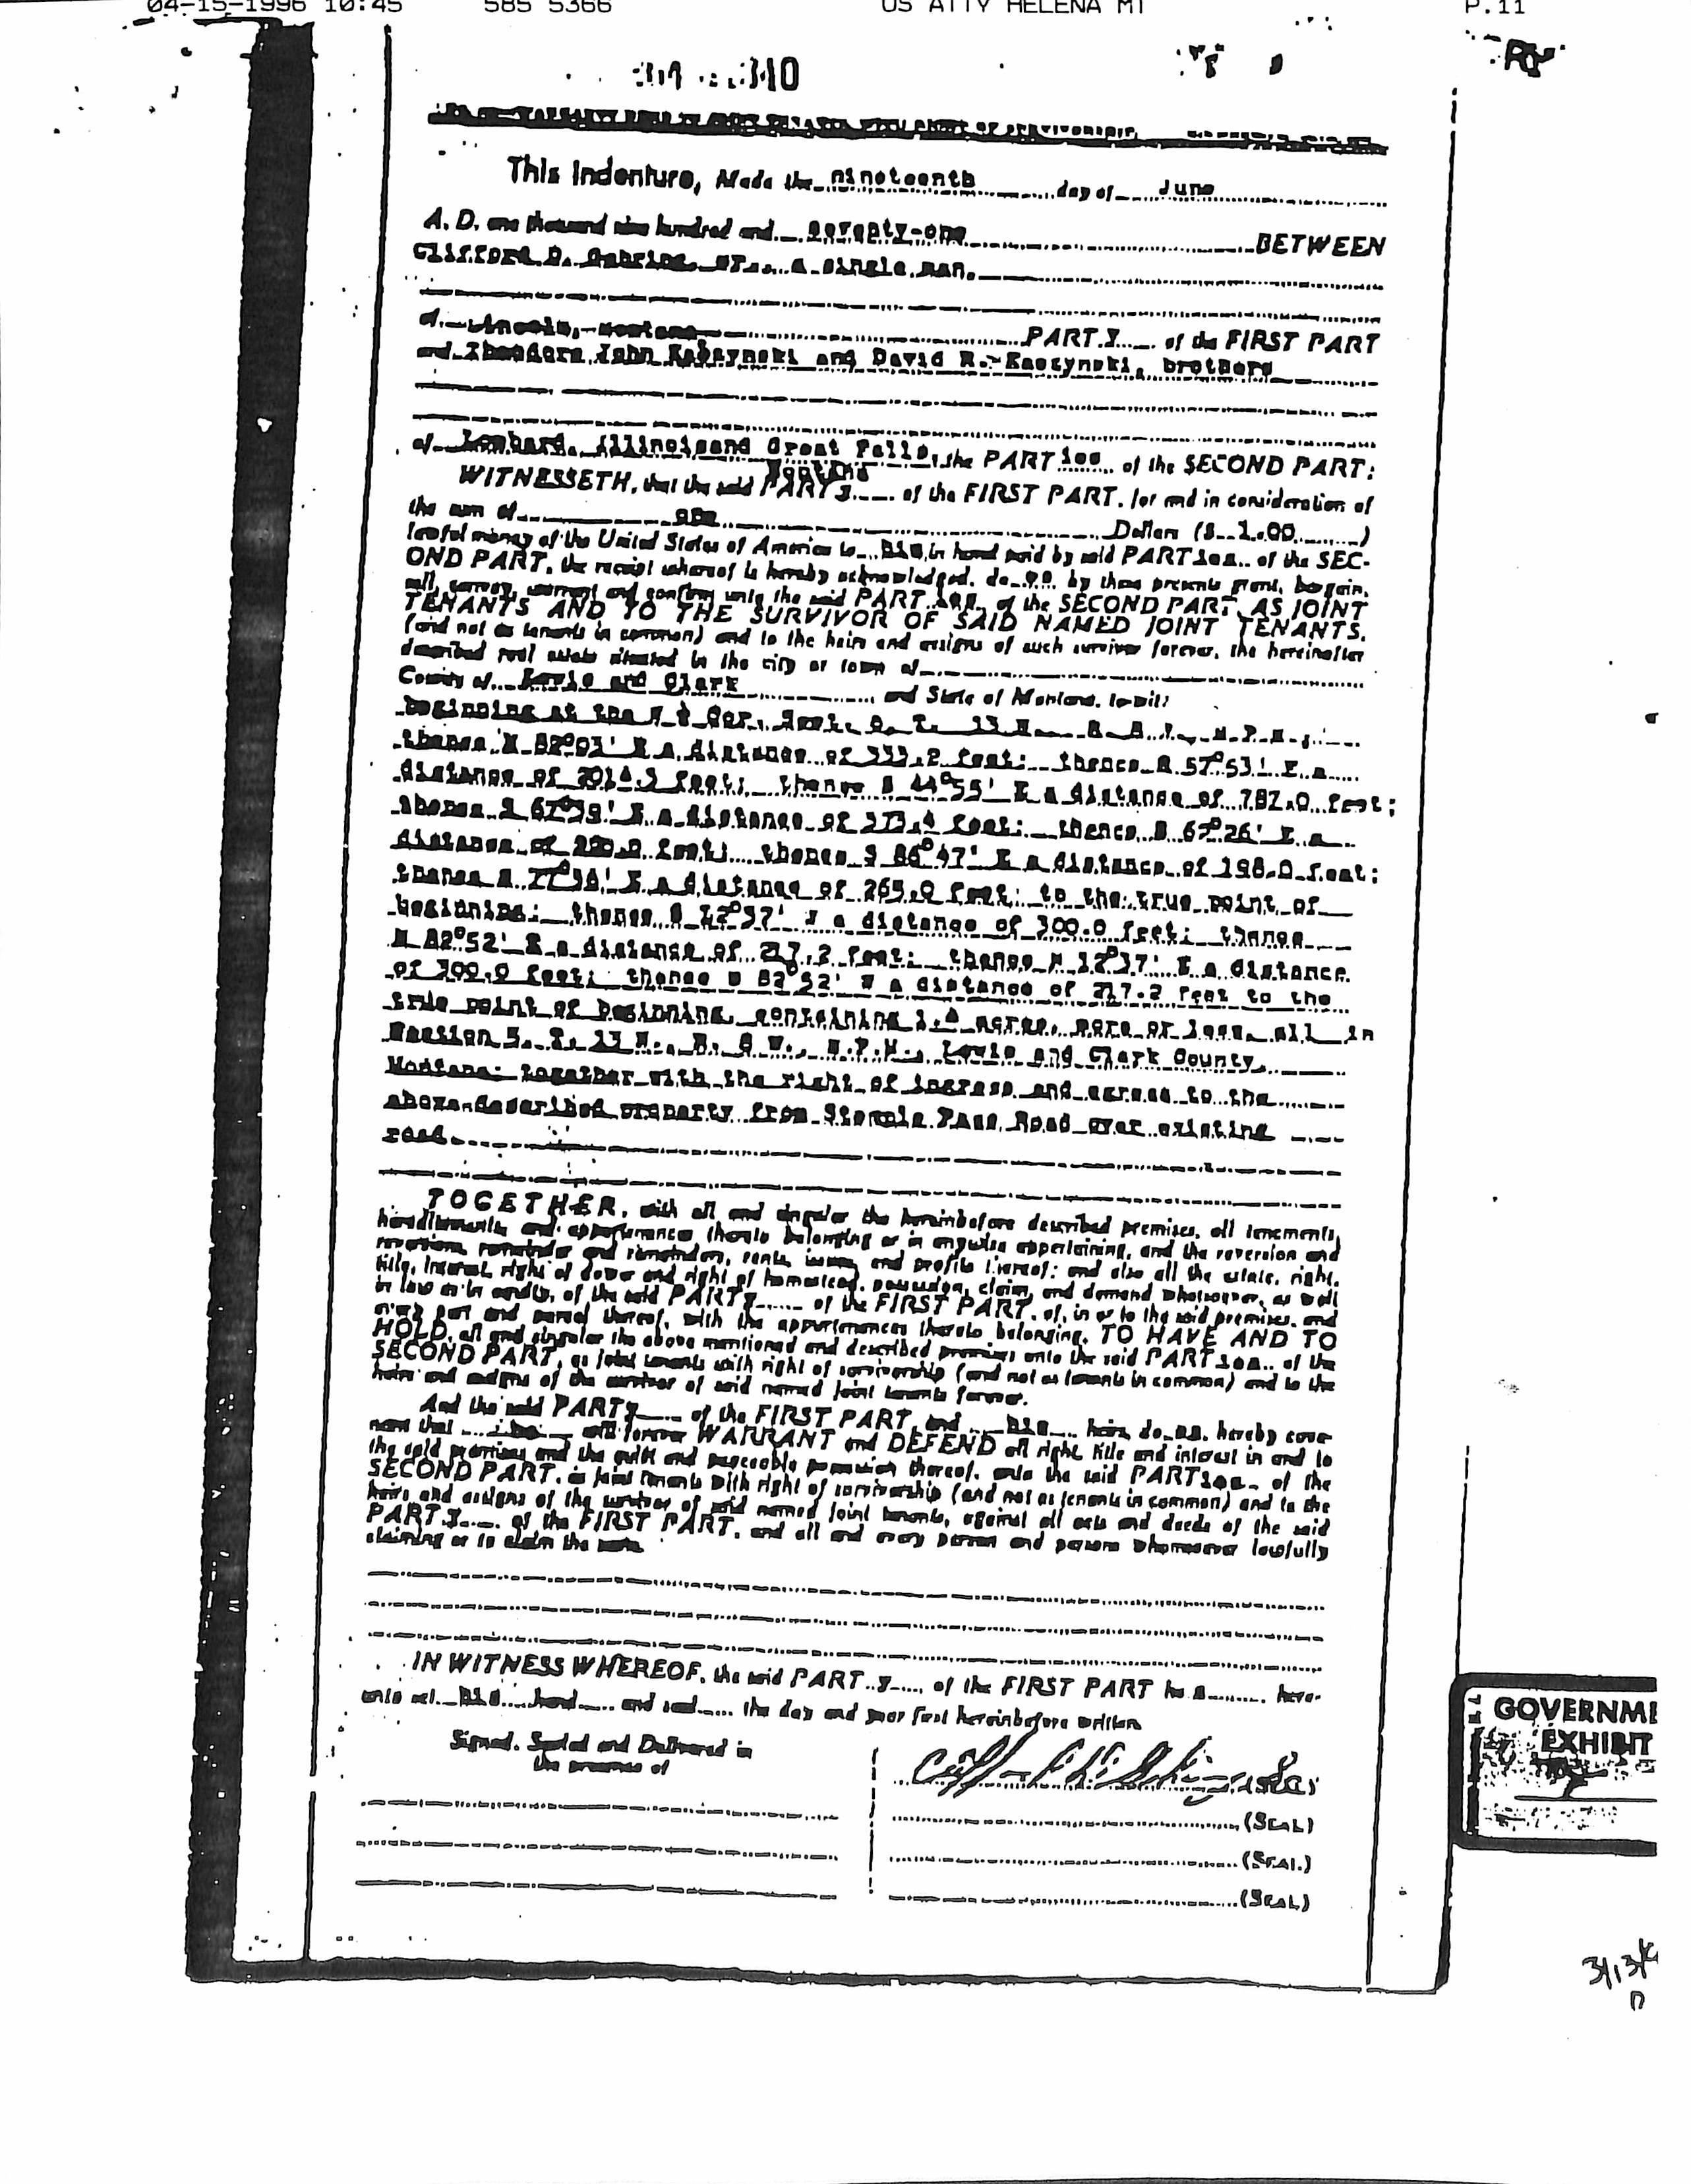 t-s-the-search-warrant-for-ted-kaczynski-s-cabin-7.jpg